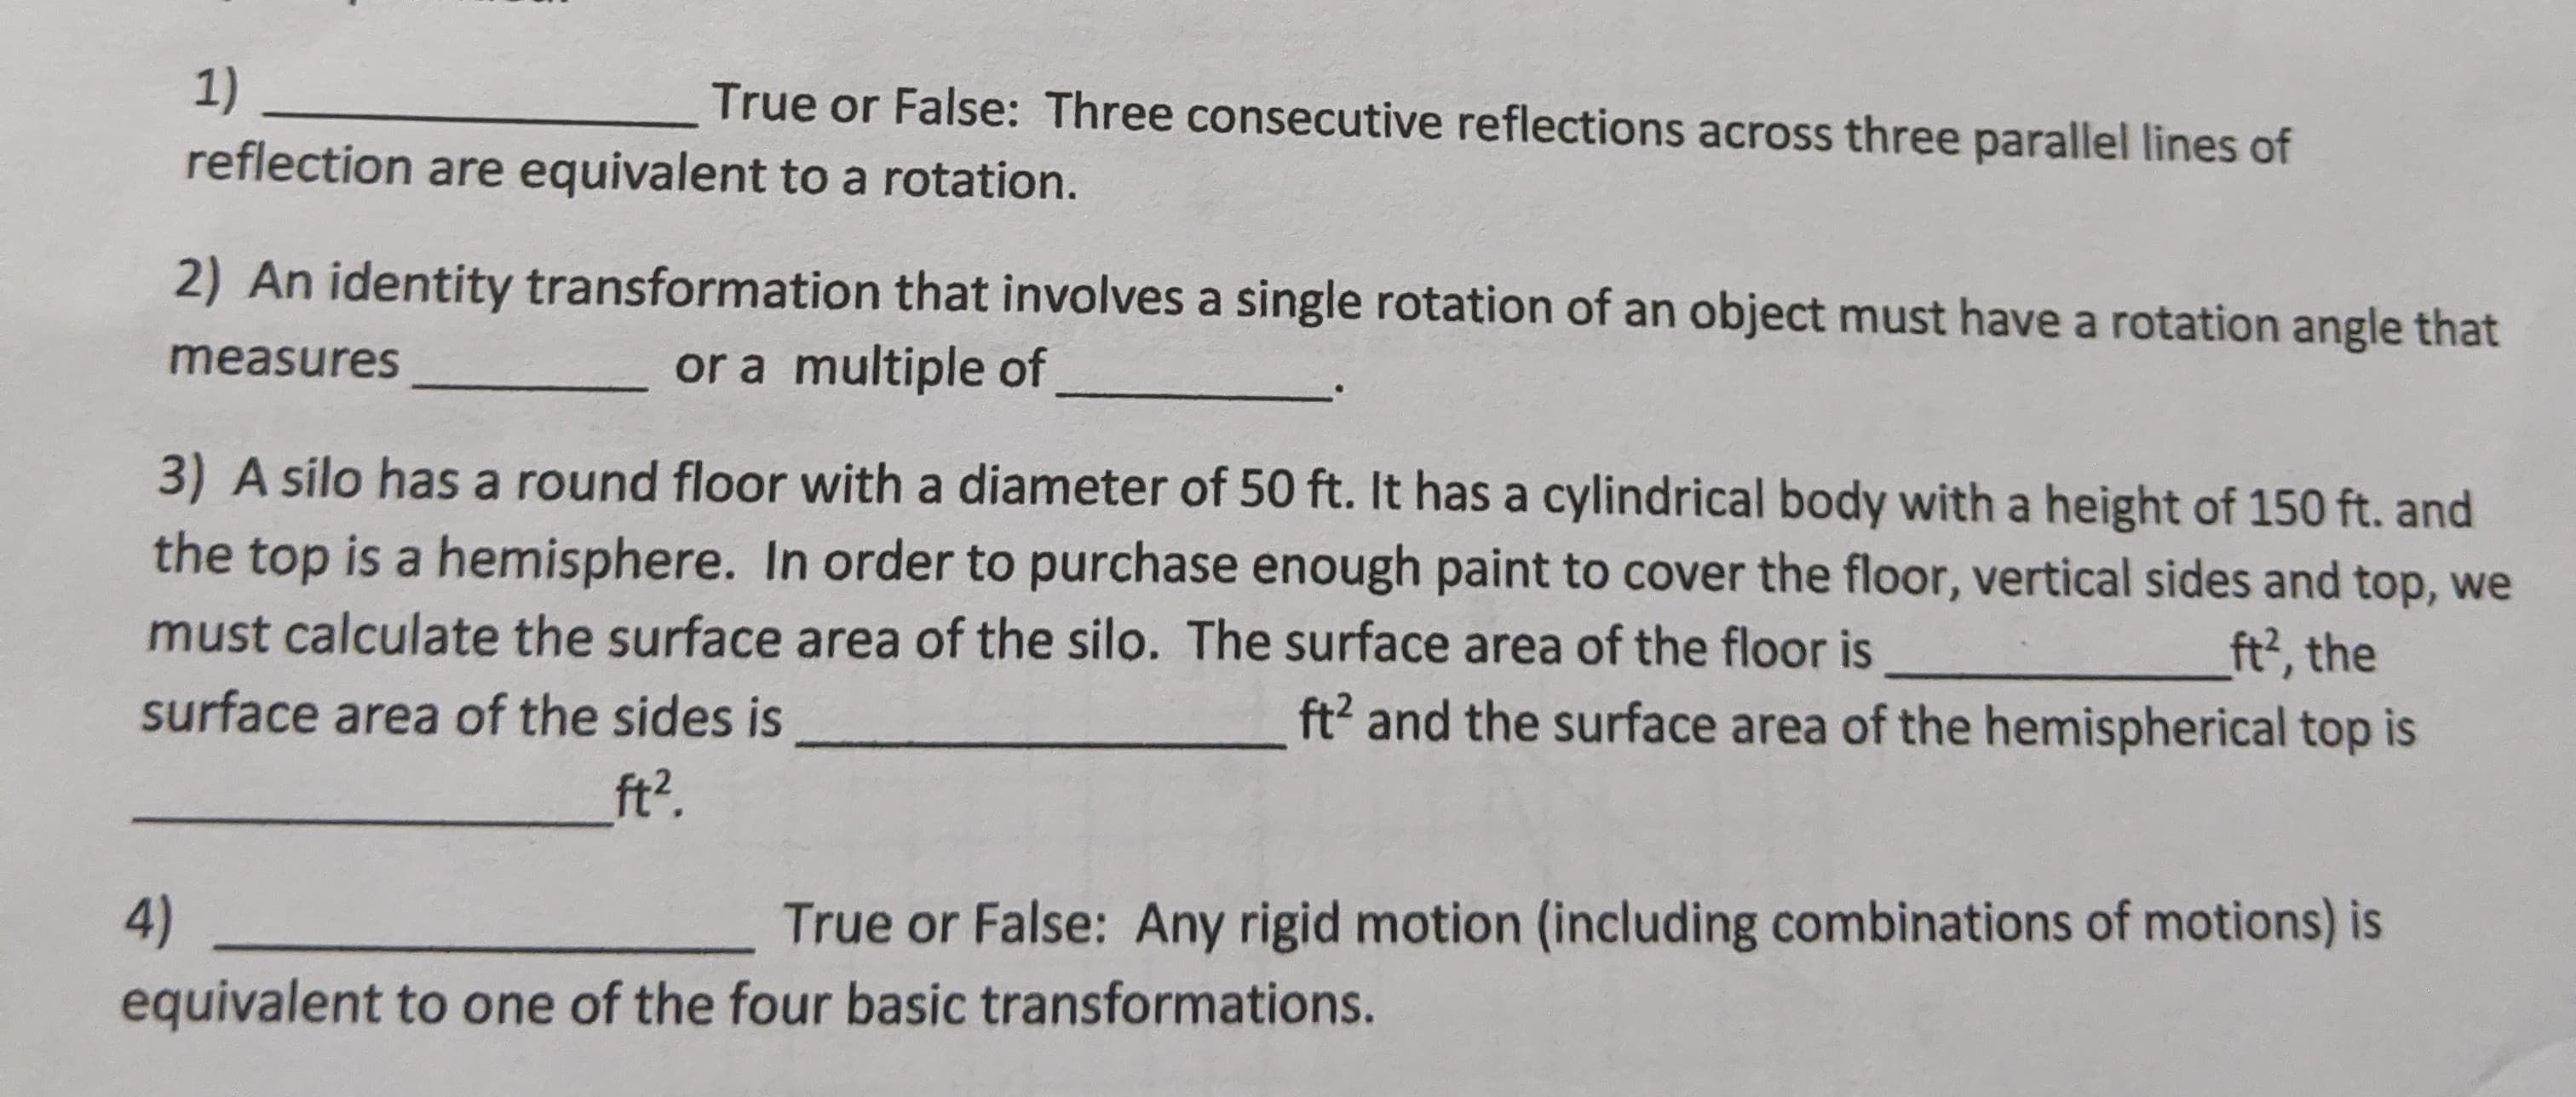 1)
reflection are equivalent to a rotation.
True or False: Three consecutive reflections across three parallel lines of
